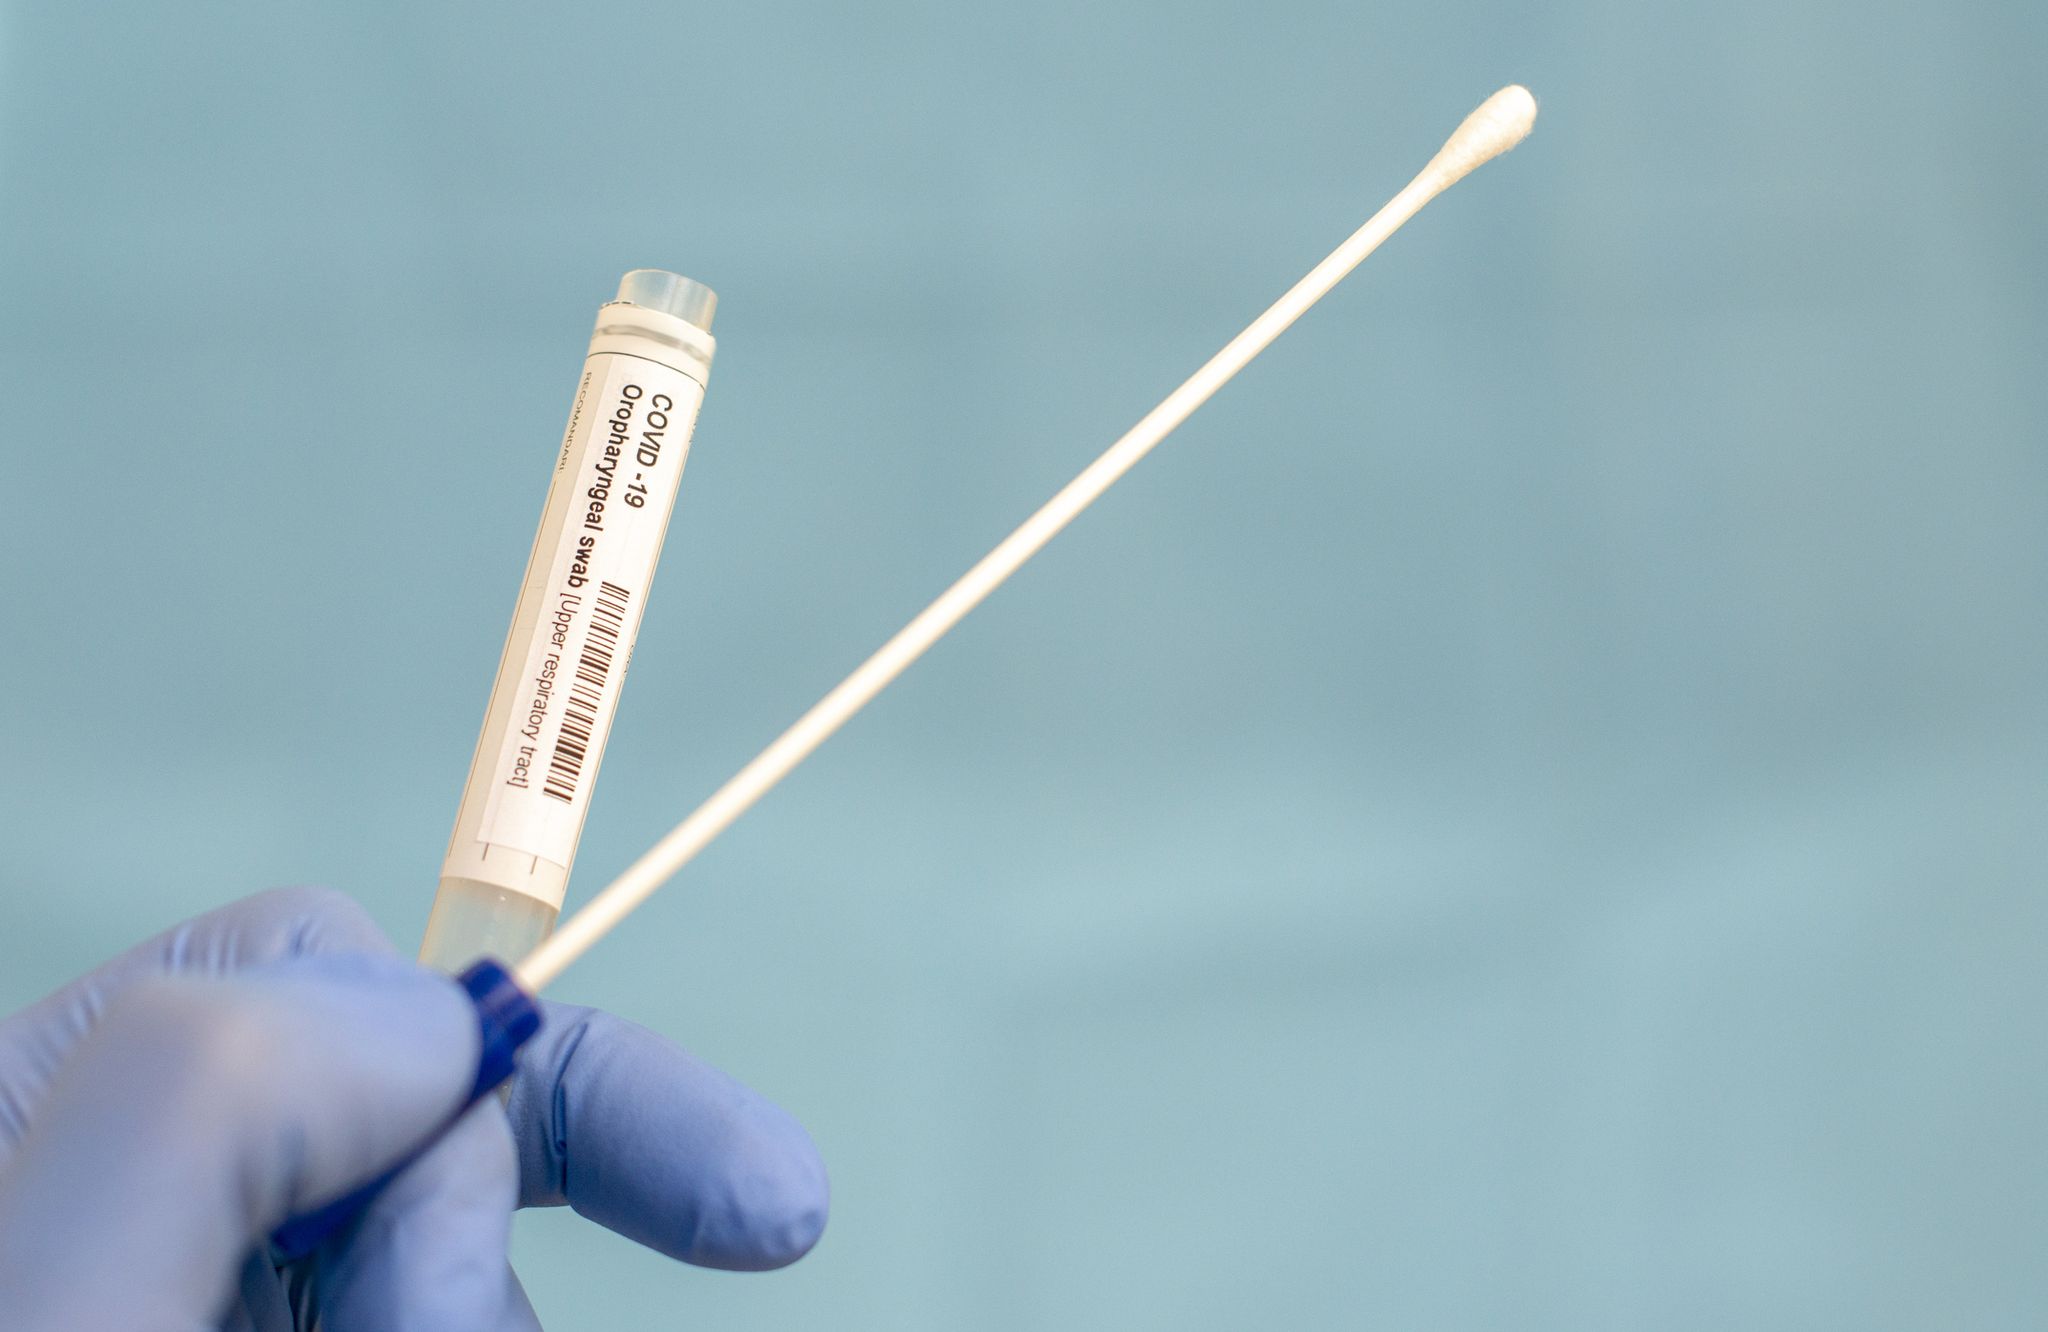 cotton swab and test tube for coronavirus test covid 19, macro image of medical equipment in hands of healthcare professional